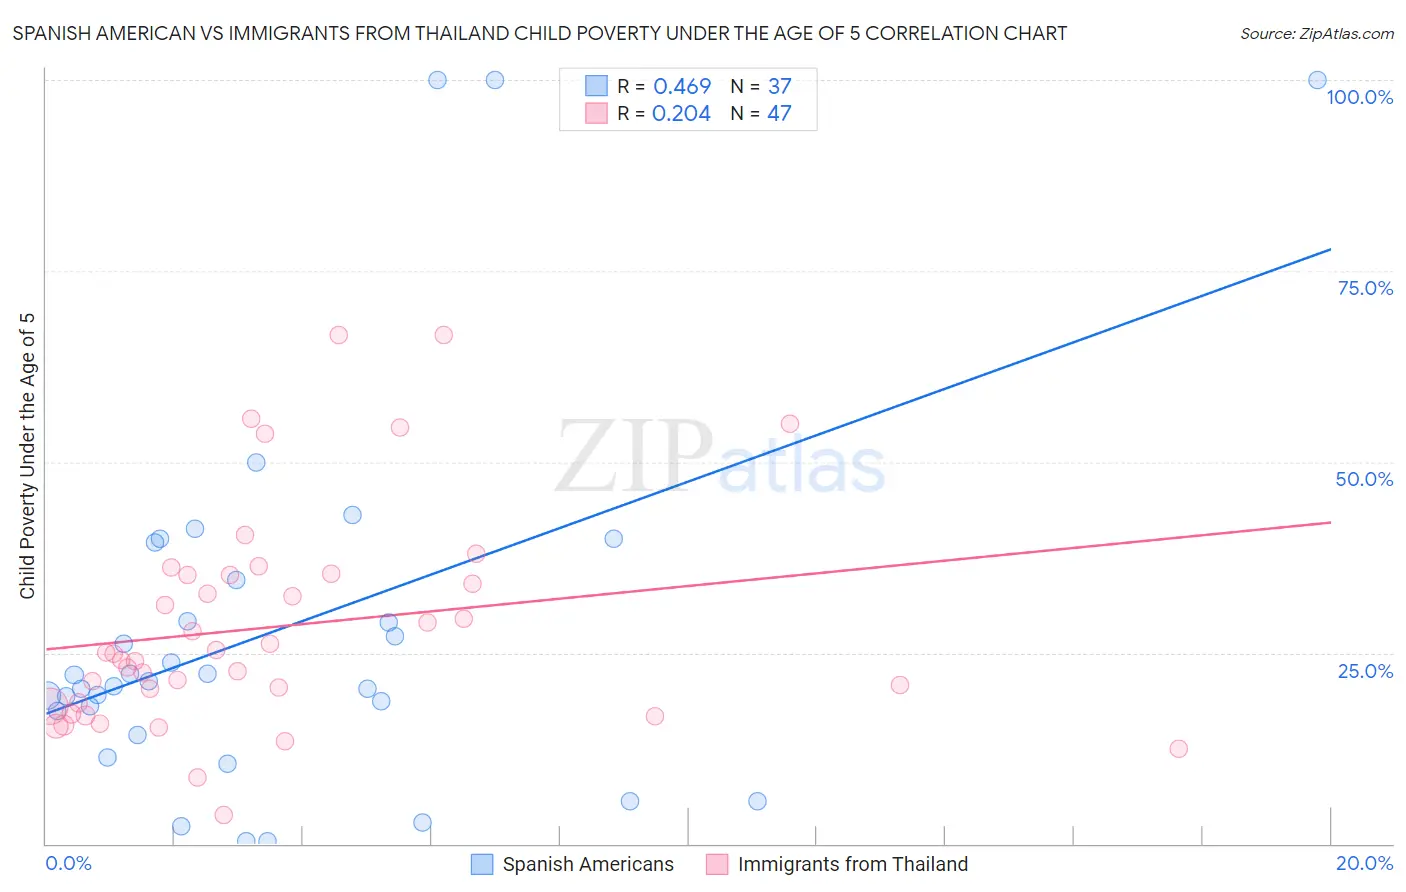 Spanish American vs Immigrants from Thailand Child Poverty Under the Age of 5